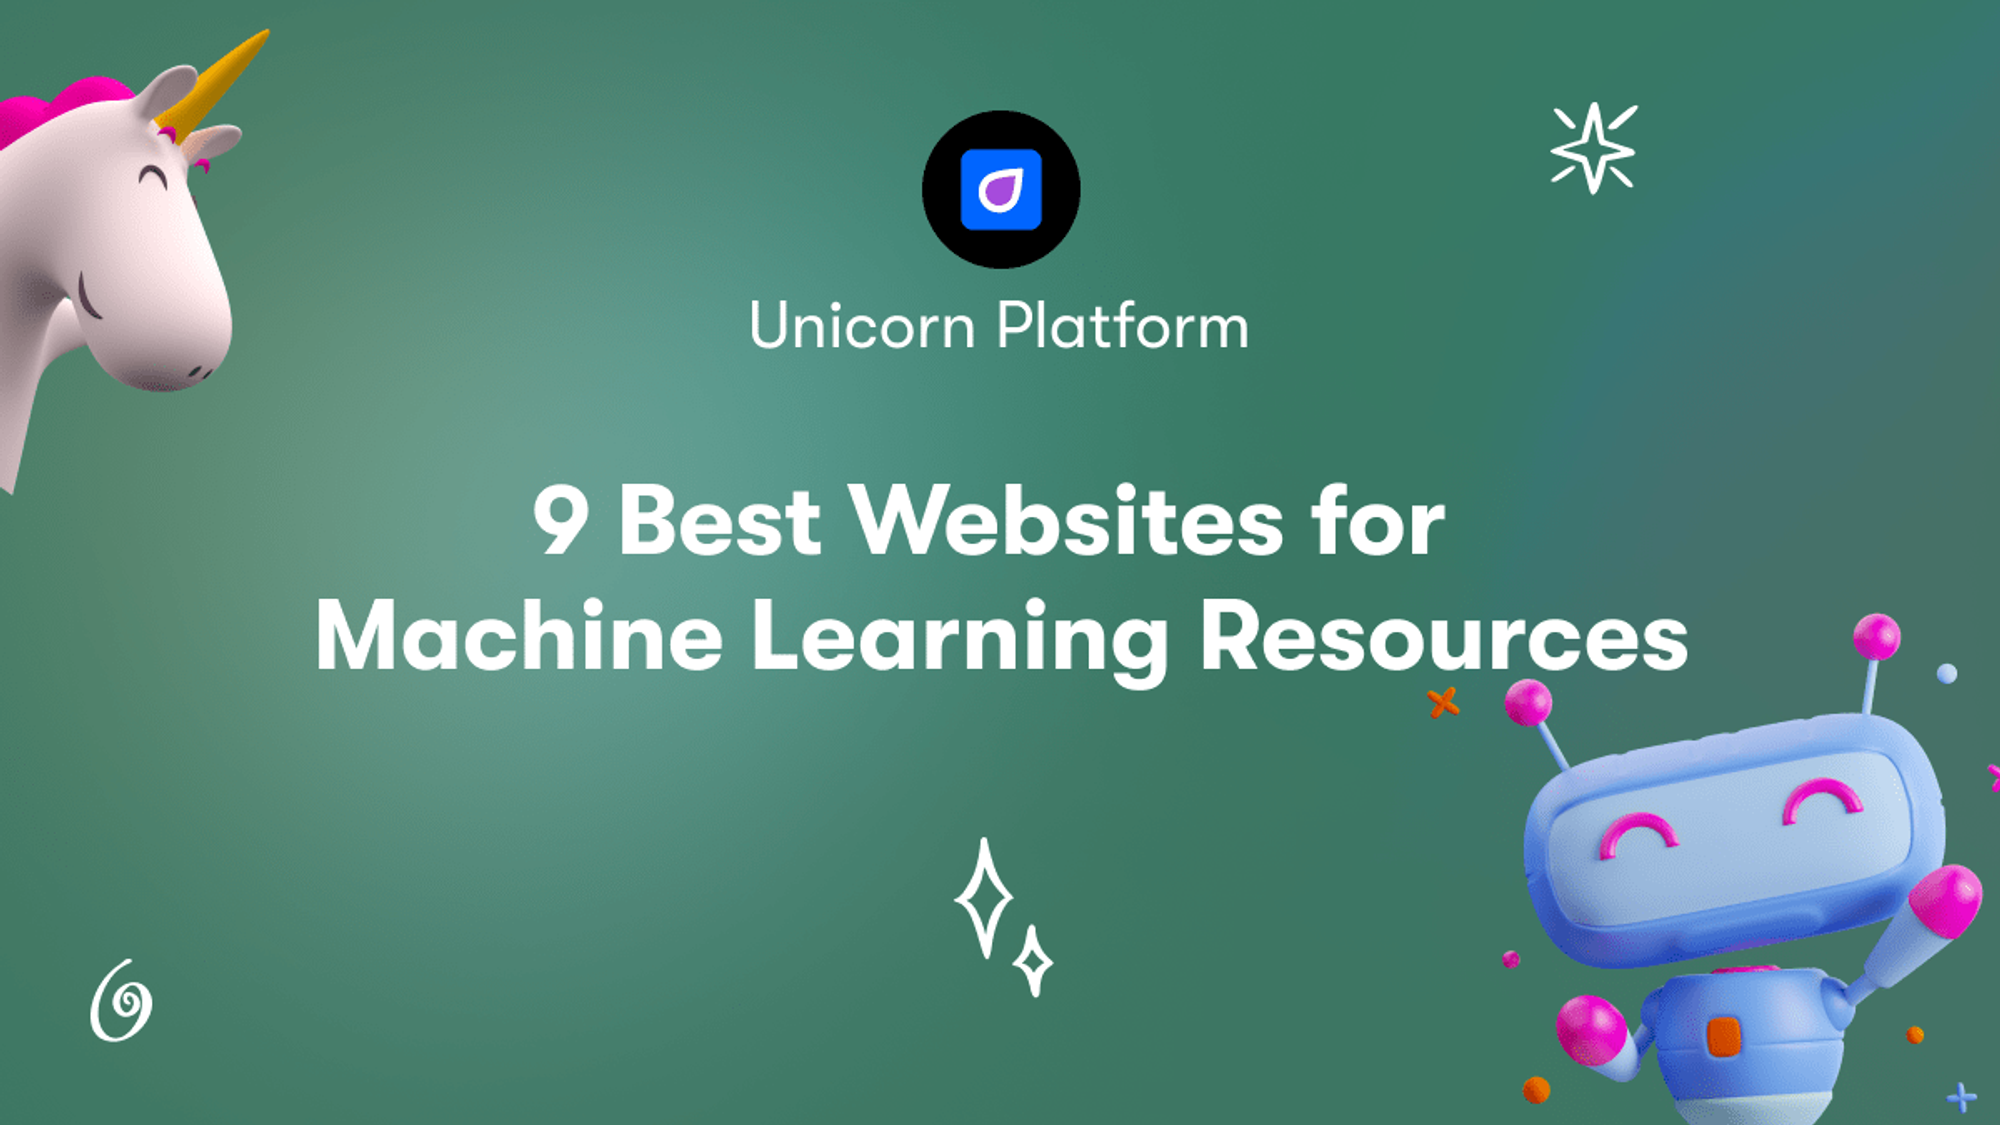 9 Best Websites for Machine Learning Resources